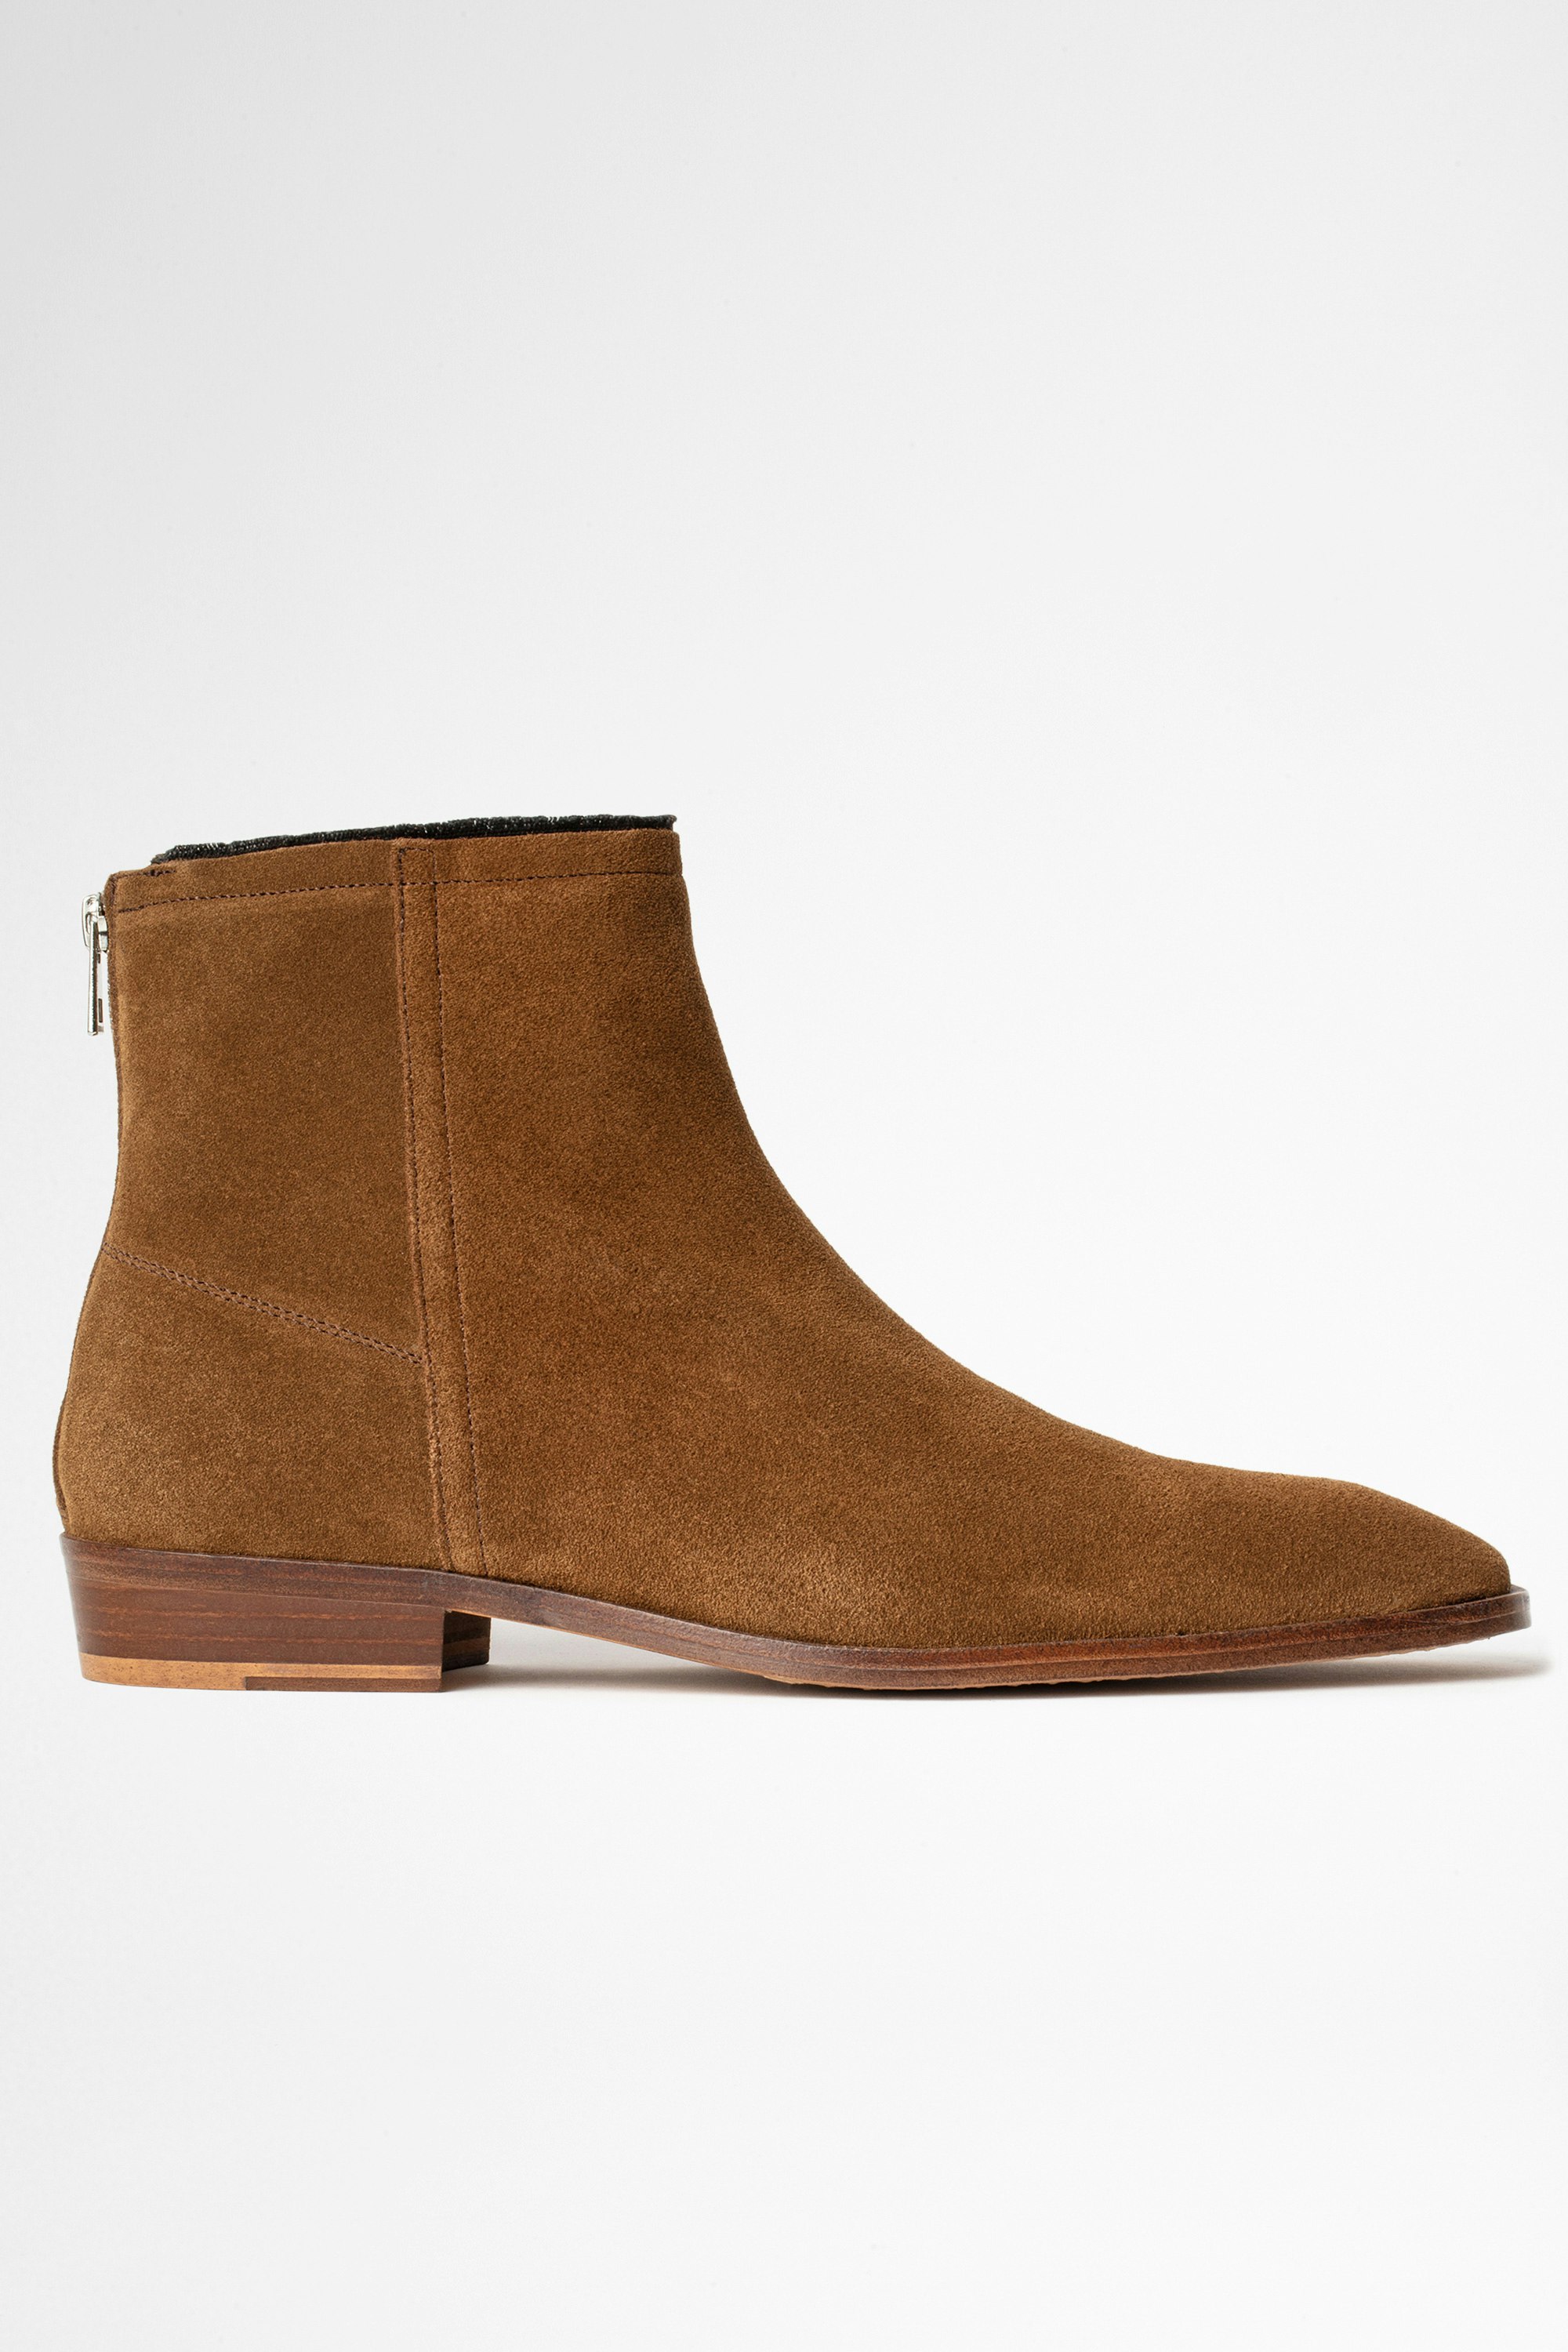 Suede Ankle Boots Leather Men's cognac suede ankle boots